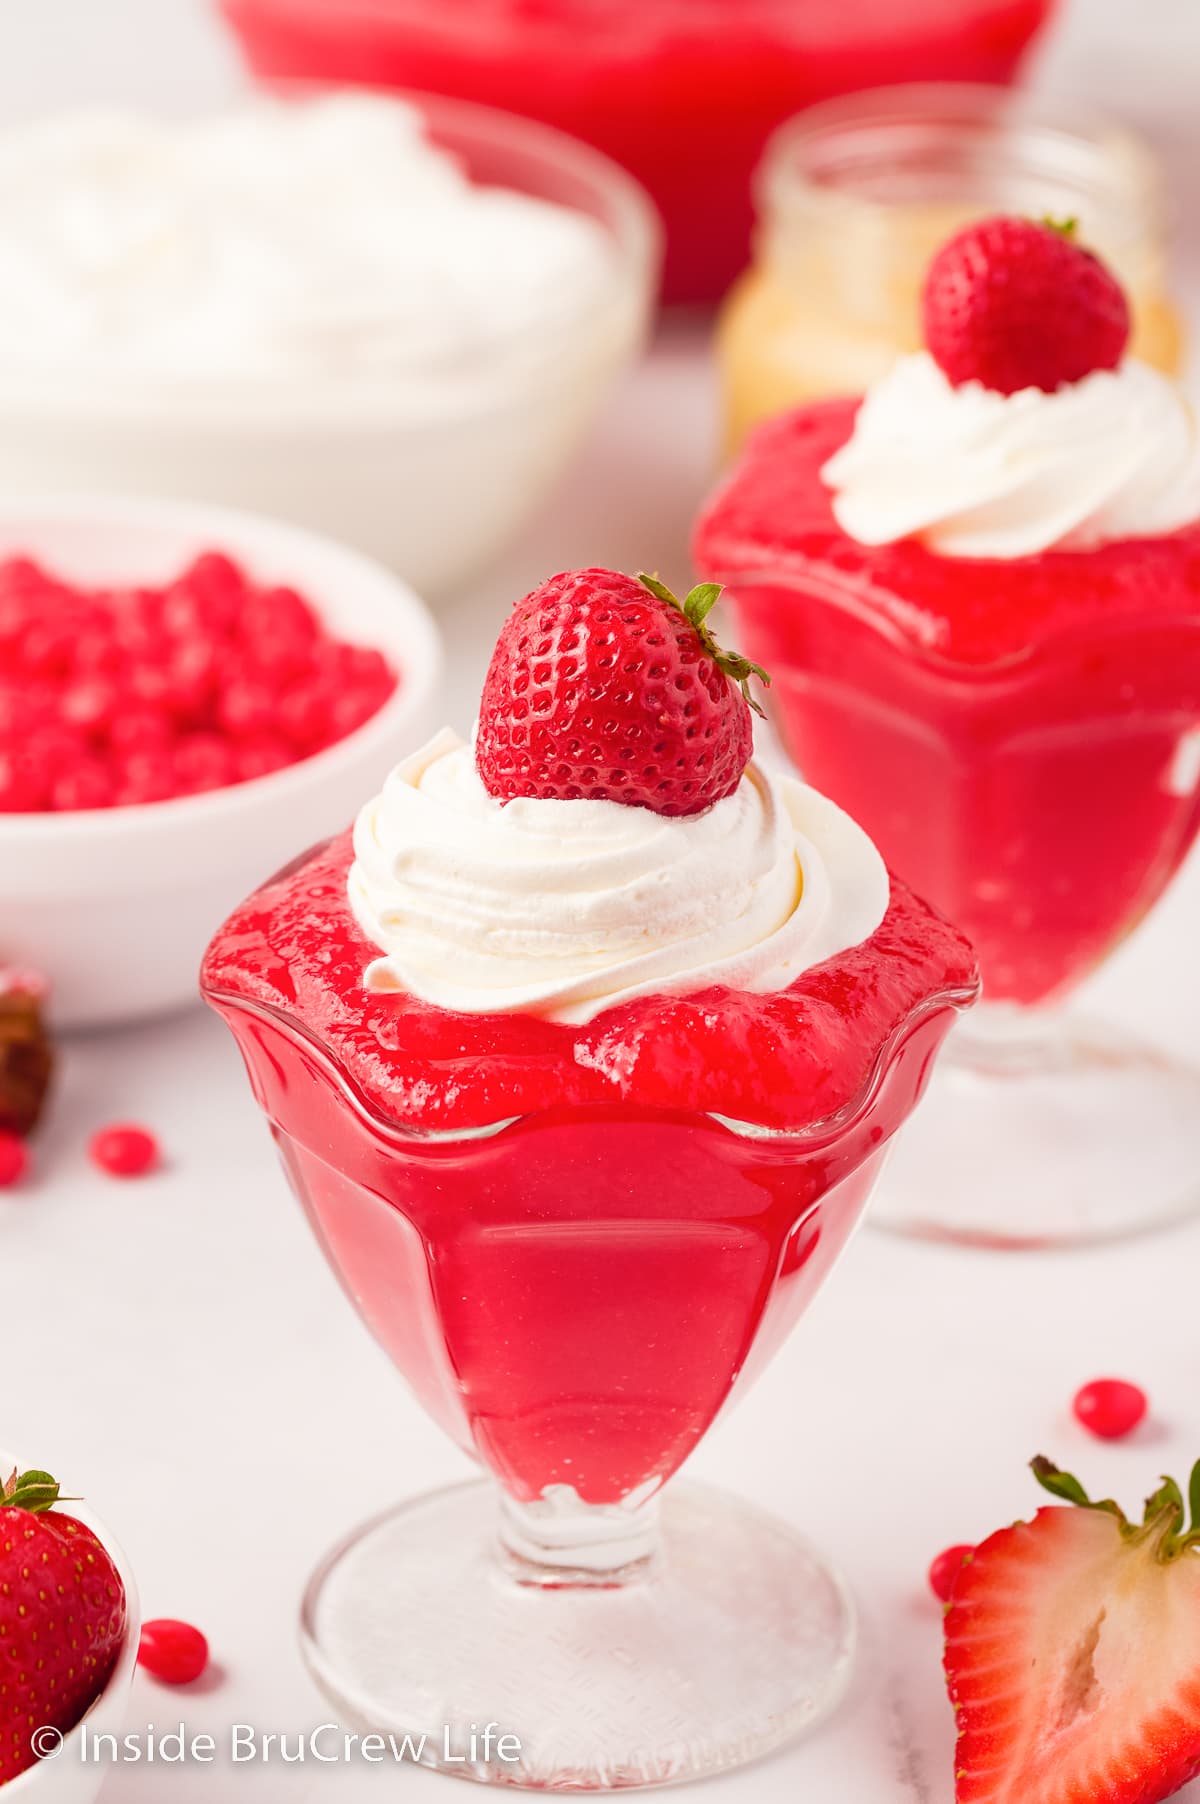 Two clear glass dishes with cinnamon Jello topped with whipped cream.